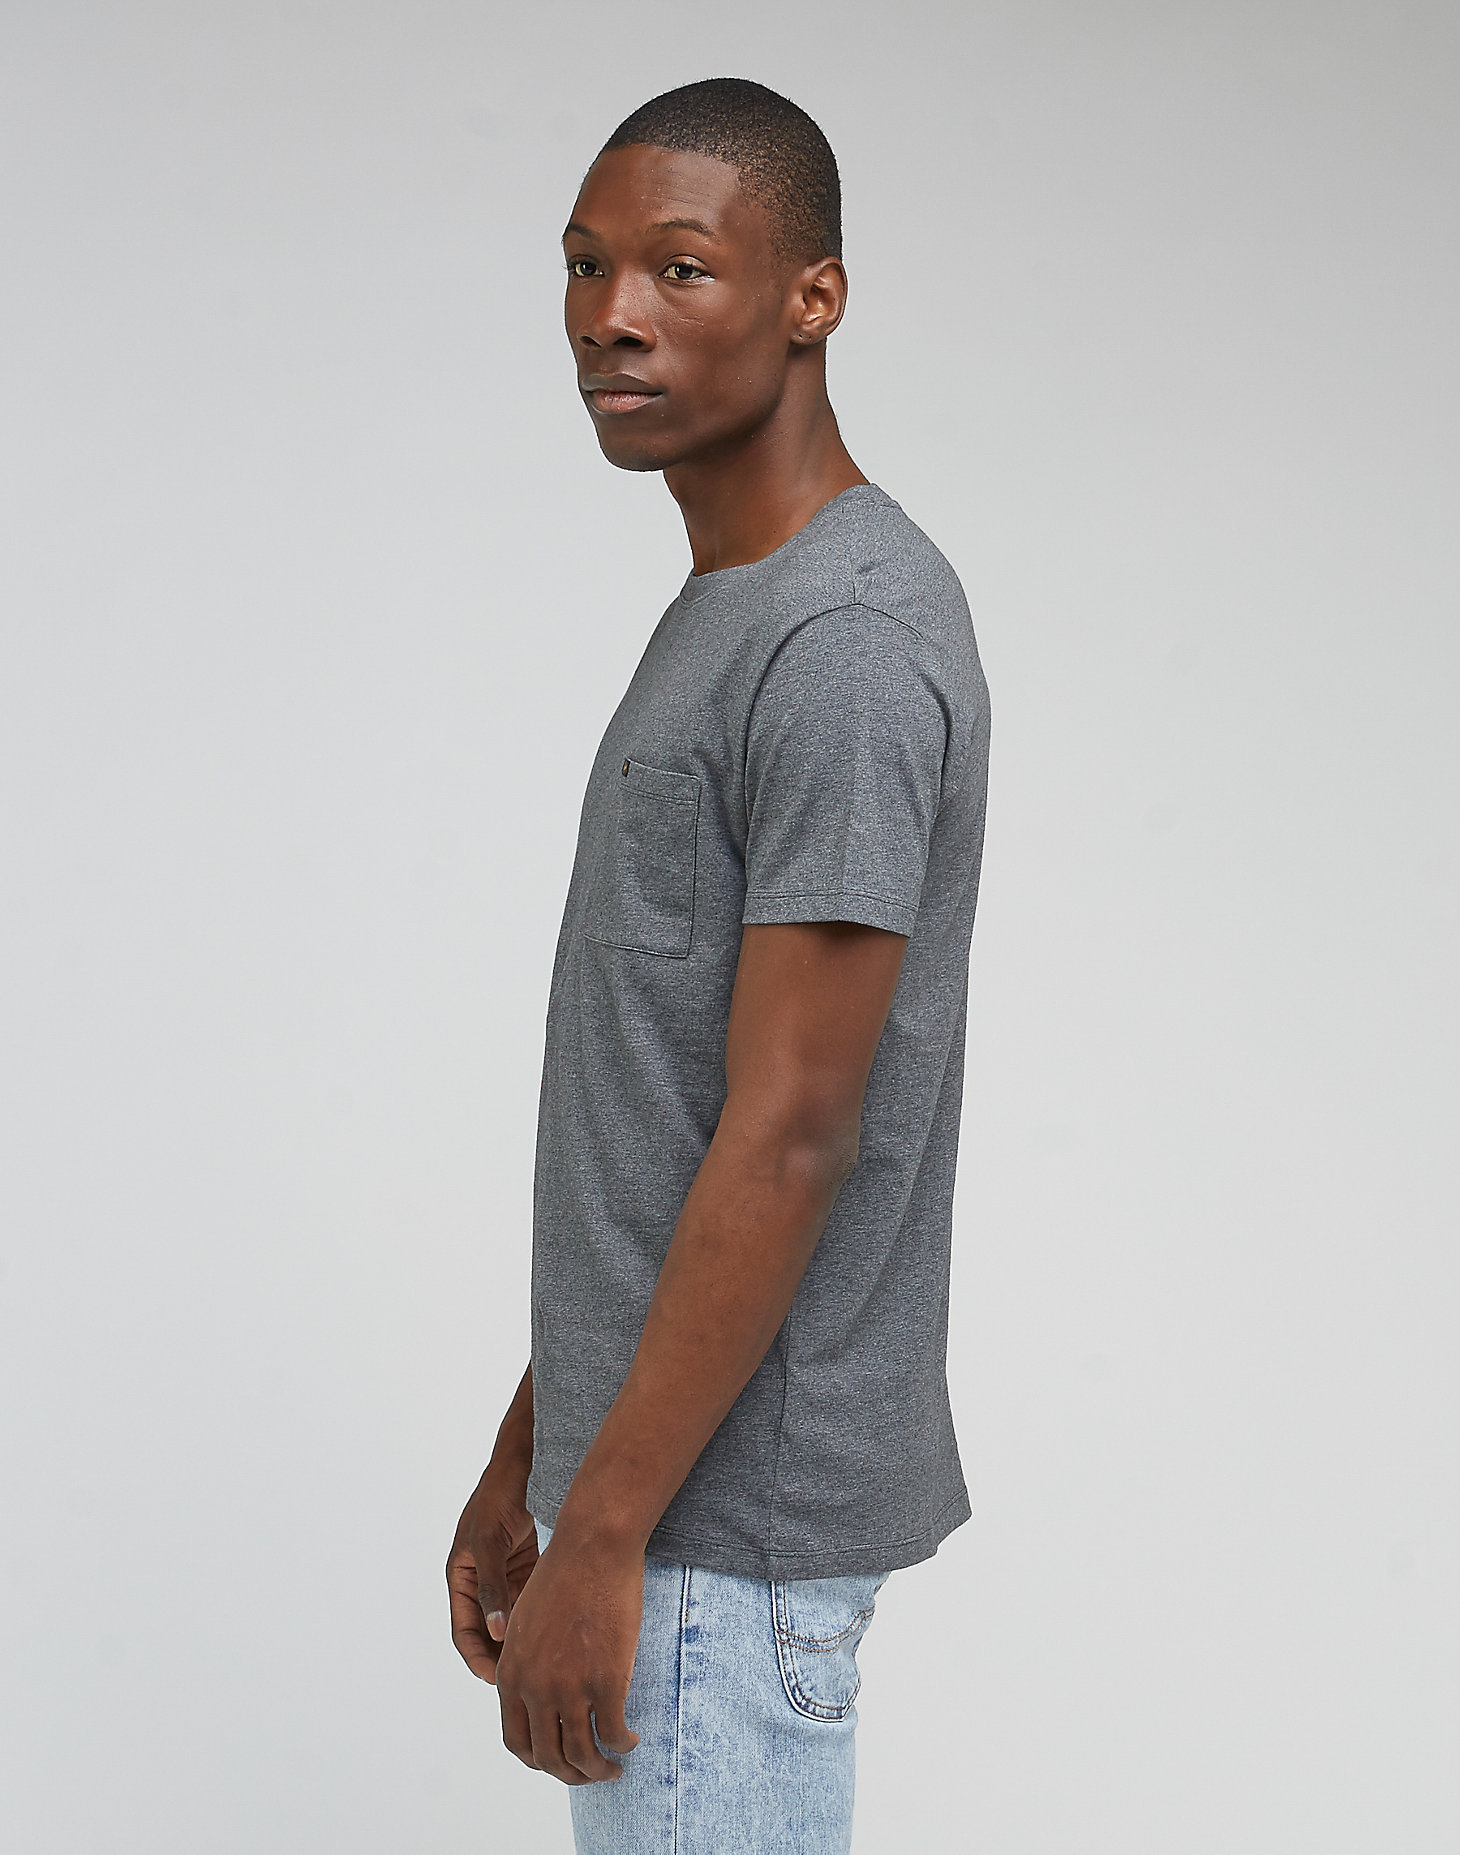 Ultimate Pocket Tee in Washed Black alternative view 3